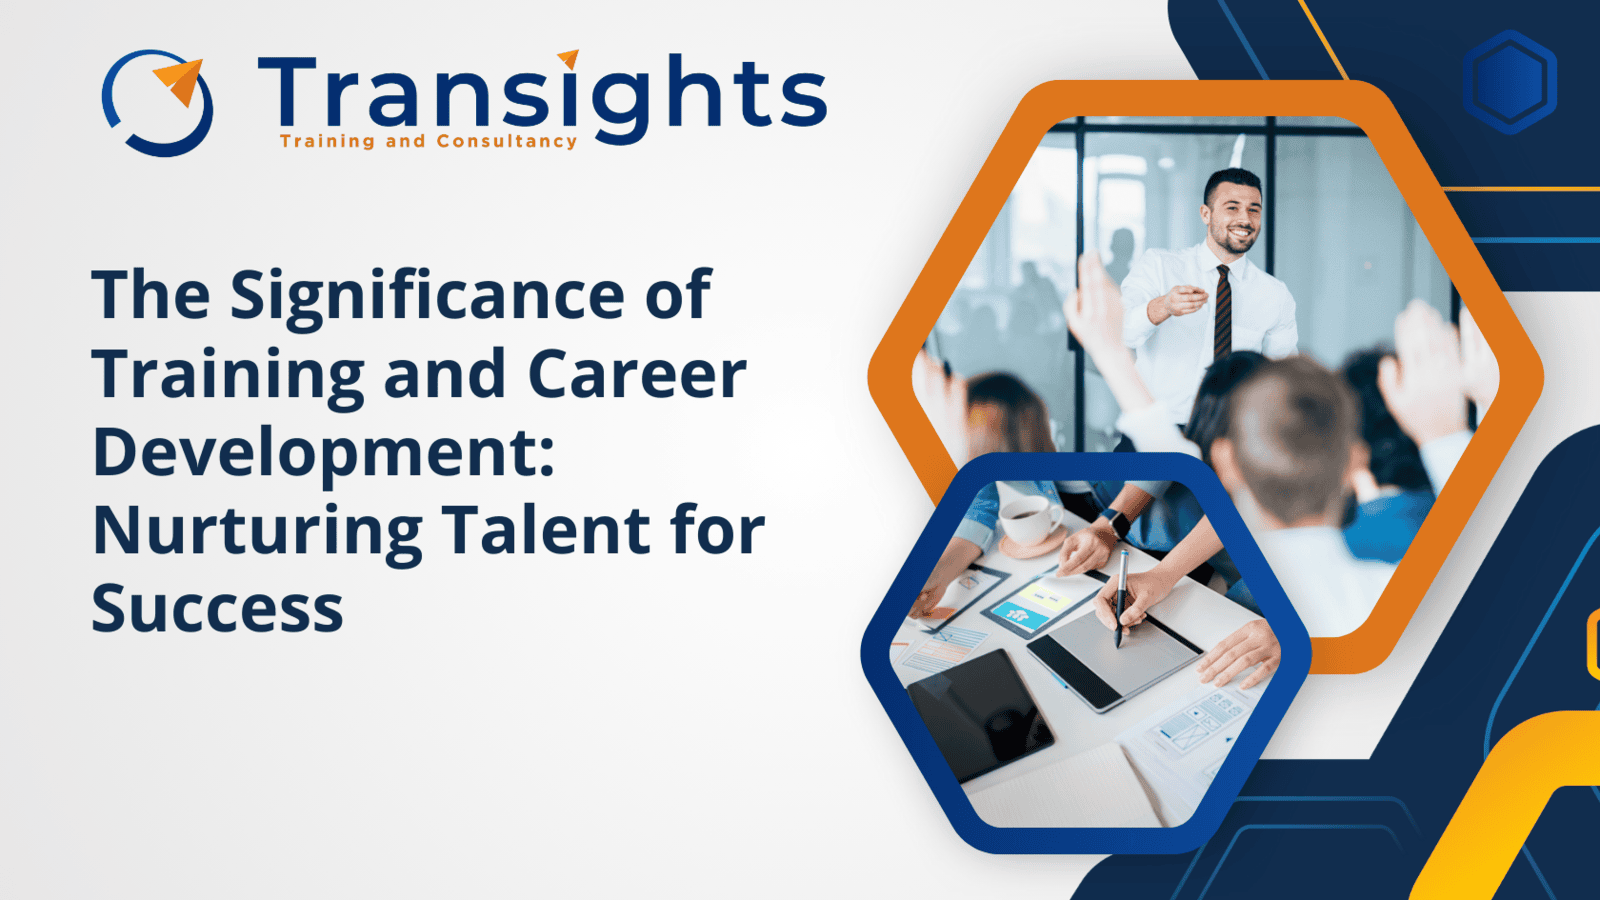 The Significance of Training and Career Development: Nurturing Talent for Success